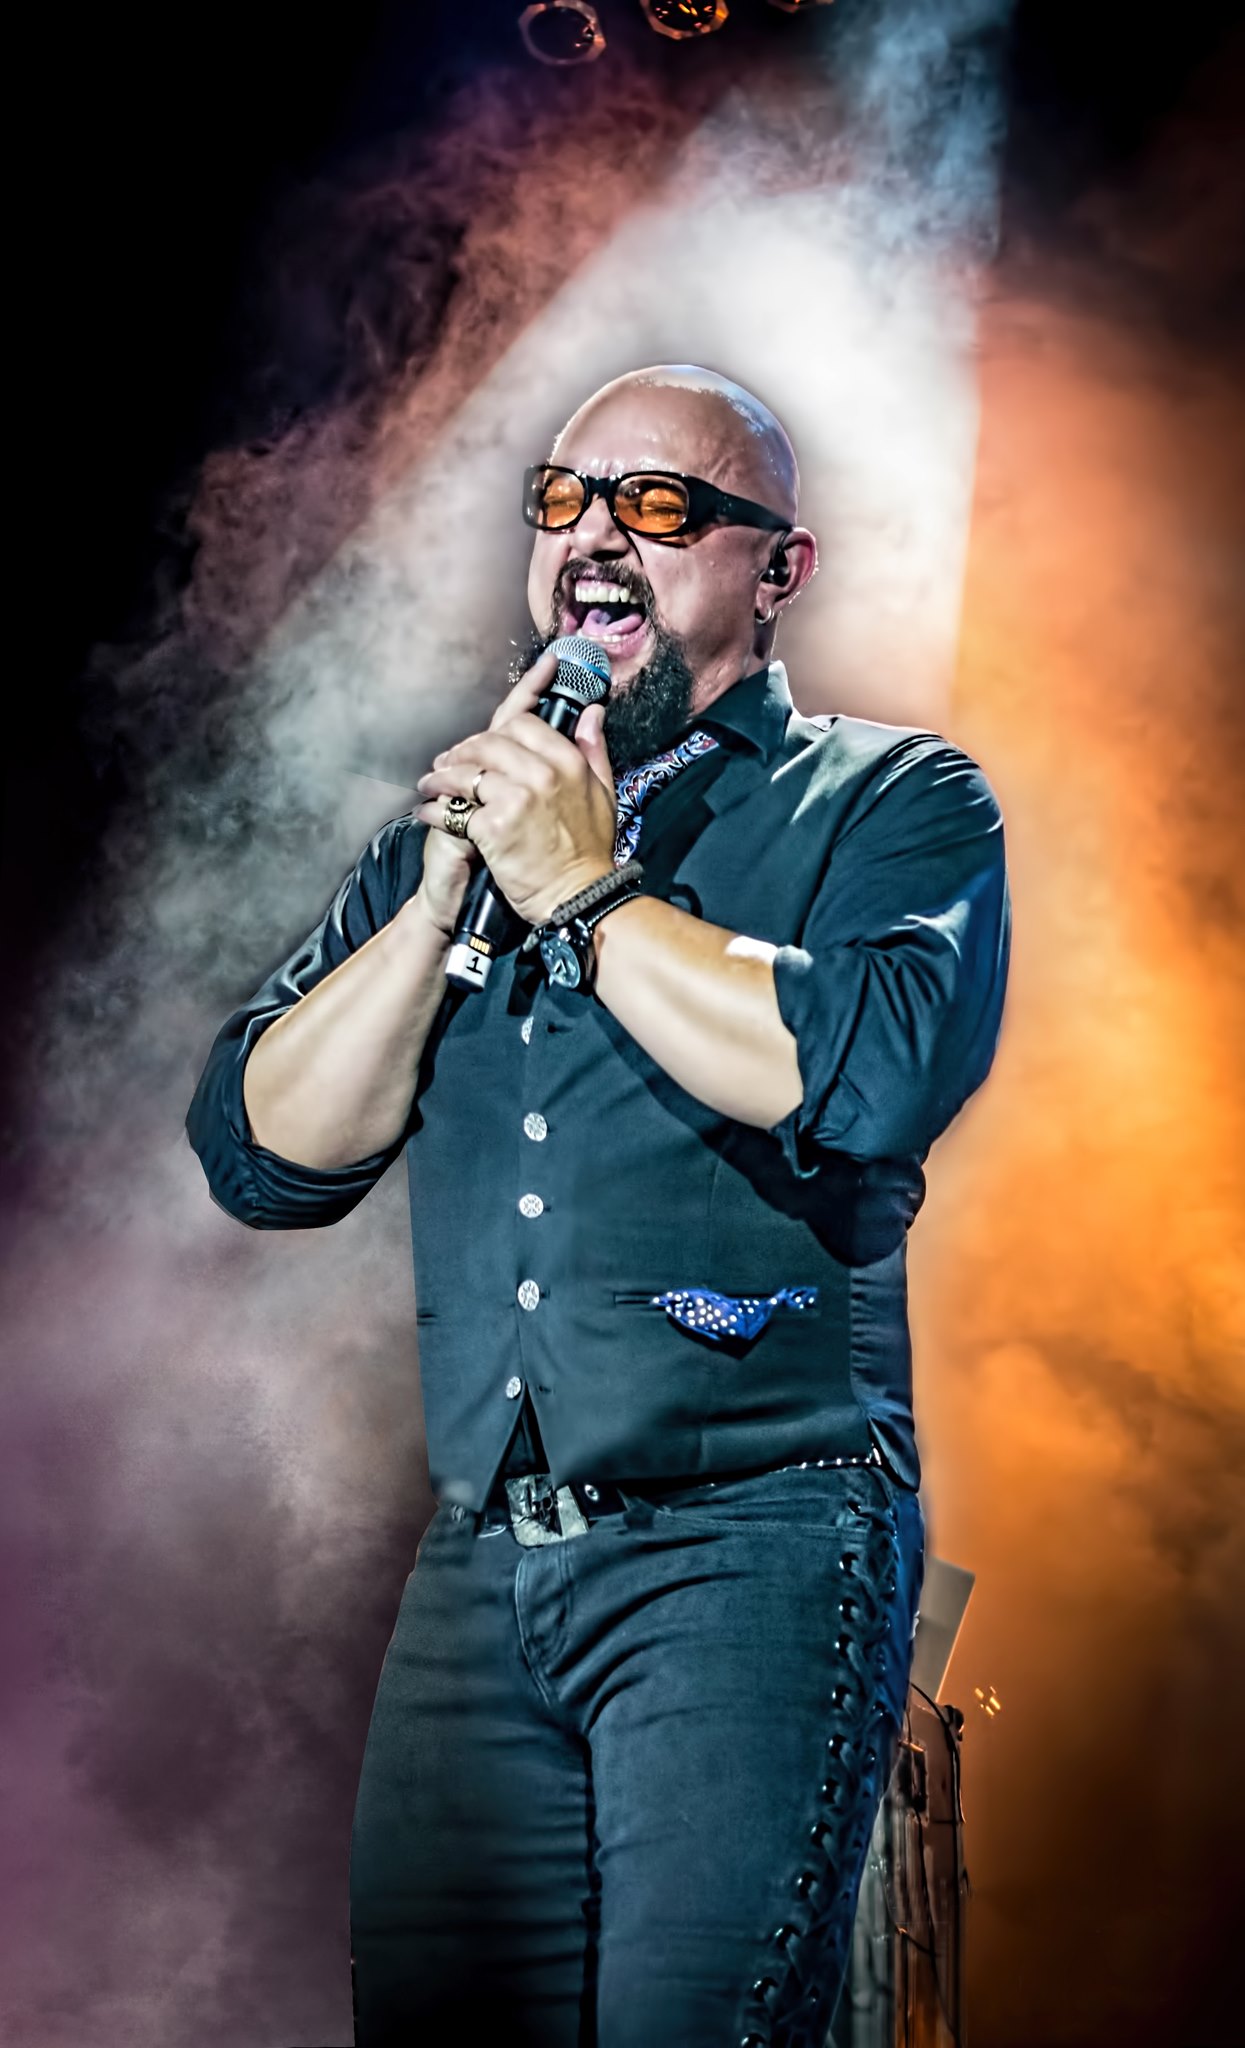 Geoff Tate Official American Singer & Song Writer Wine Maker